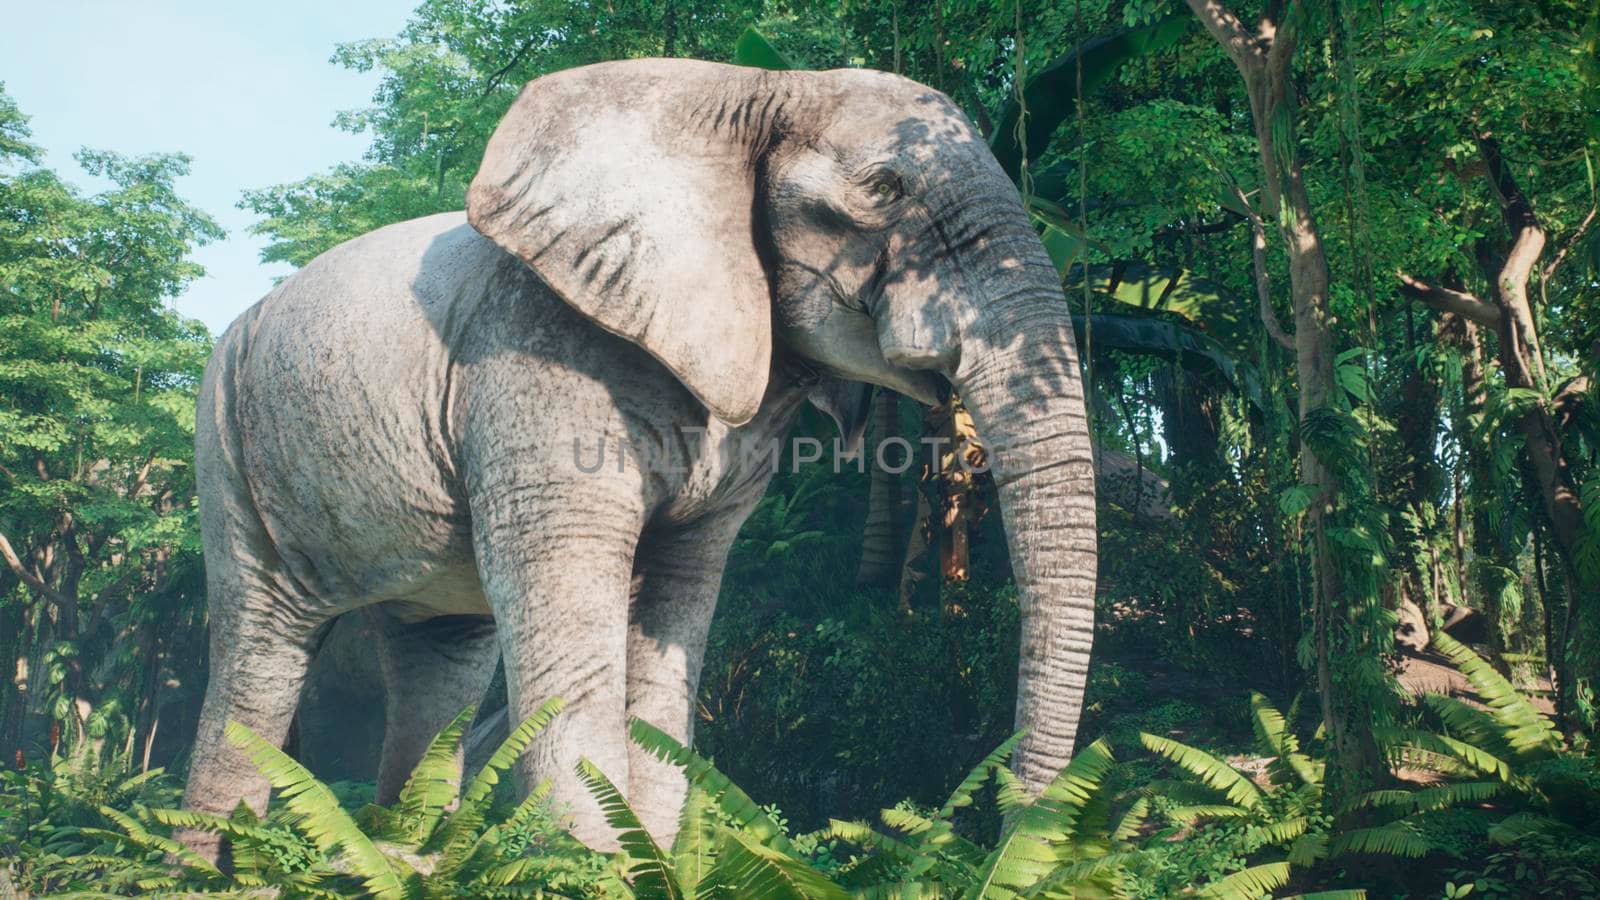 Large gray African elephant in the jungle eats foliage from trees. A look at the African jungle.